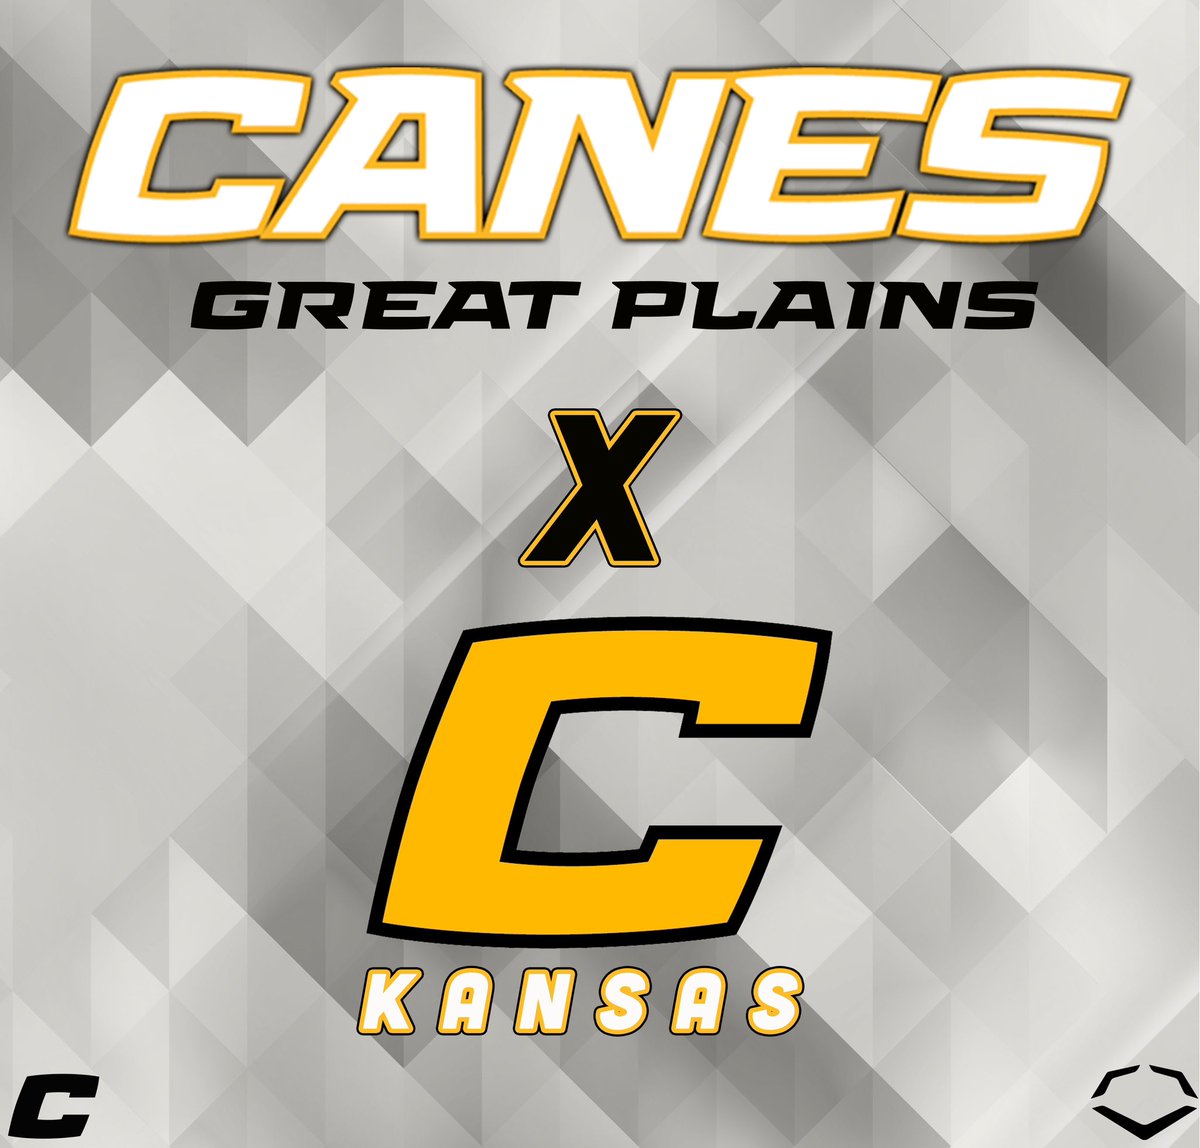 Canes are excited to announce the addition of Canes Great Plains! #thecanesbb